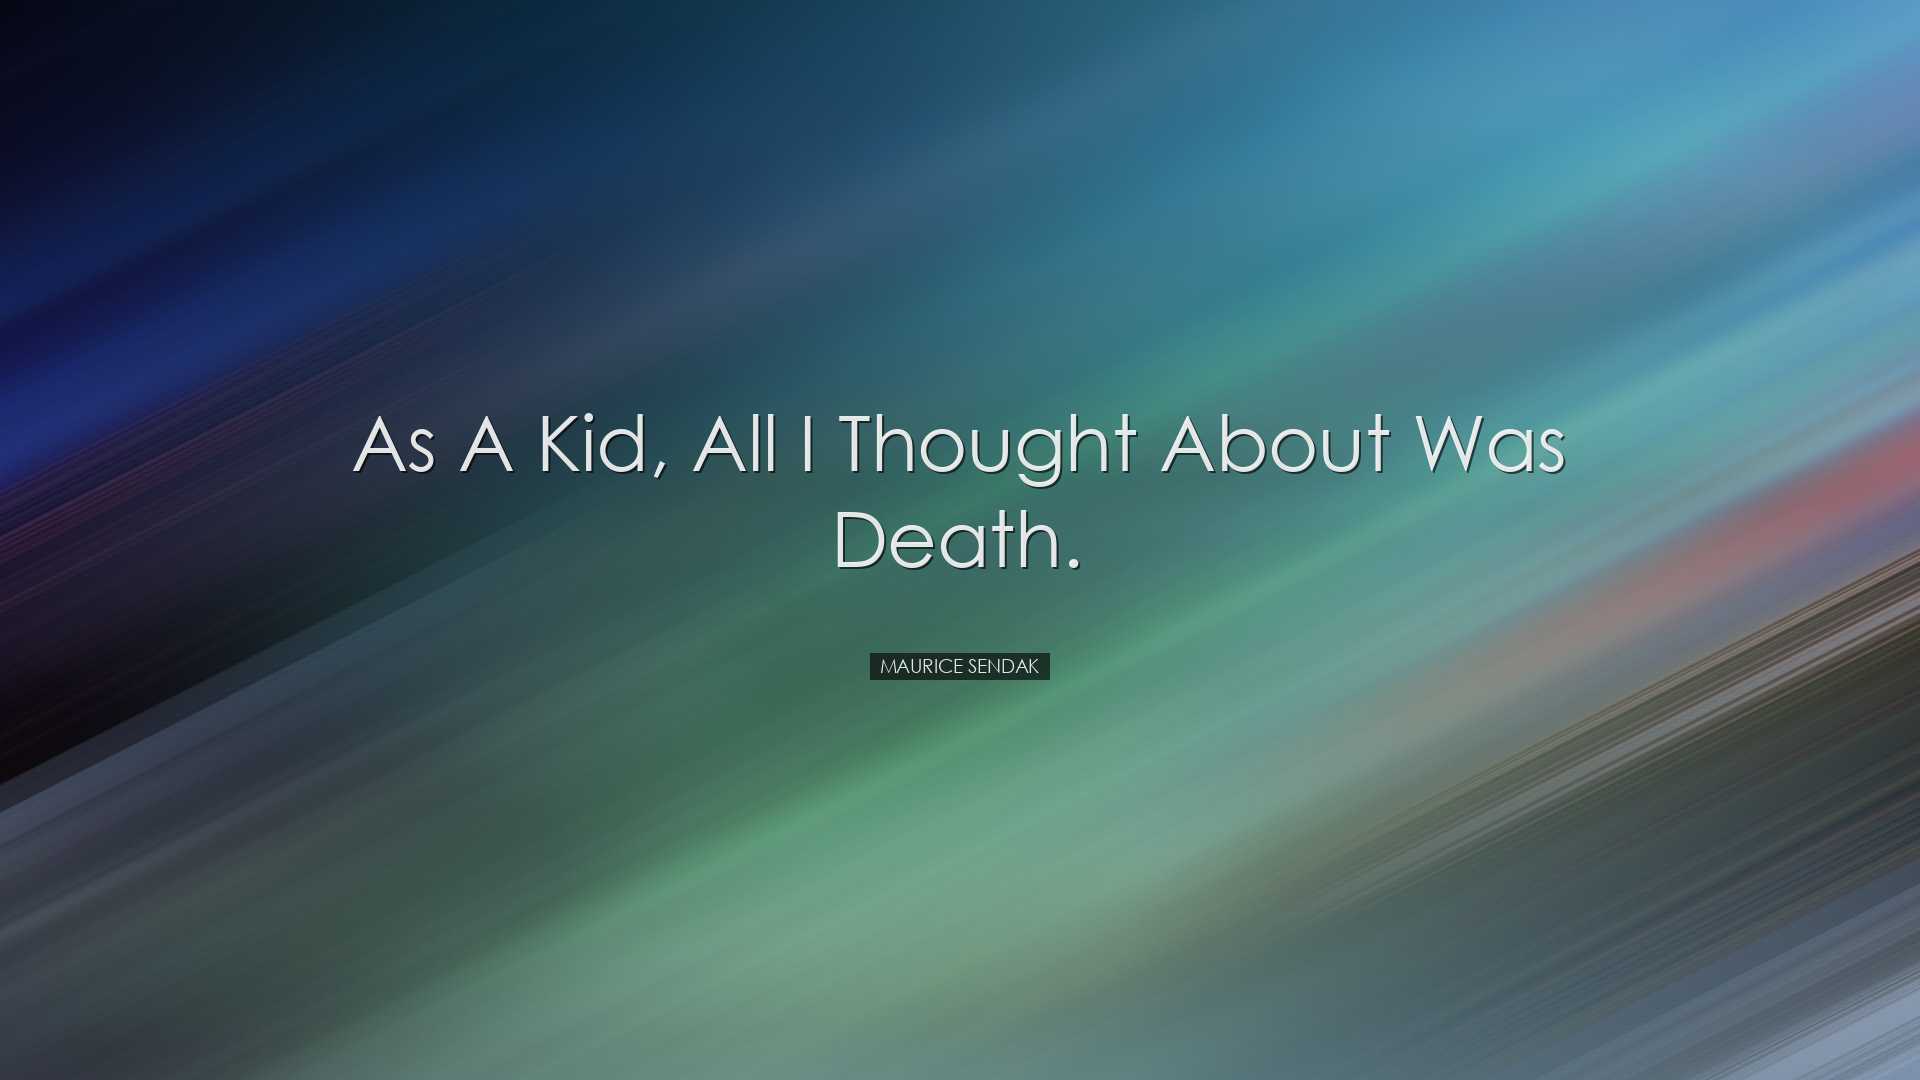 As a kid, all I thought about was death. - Maurice Sendak